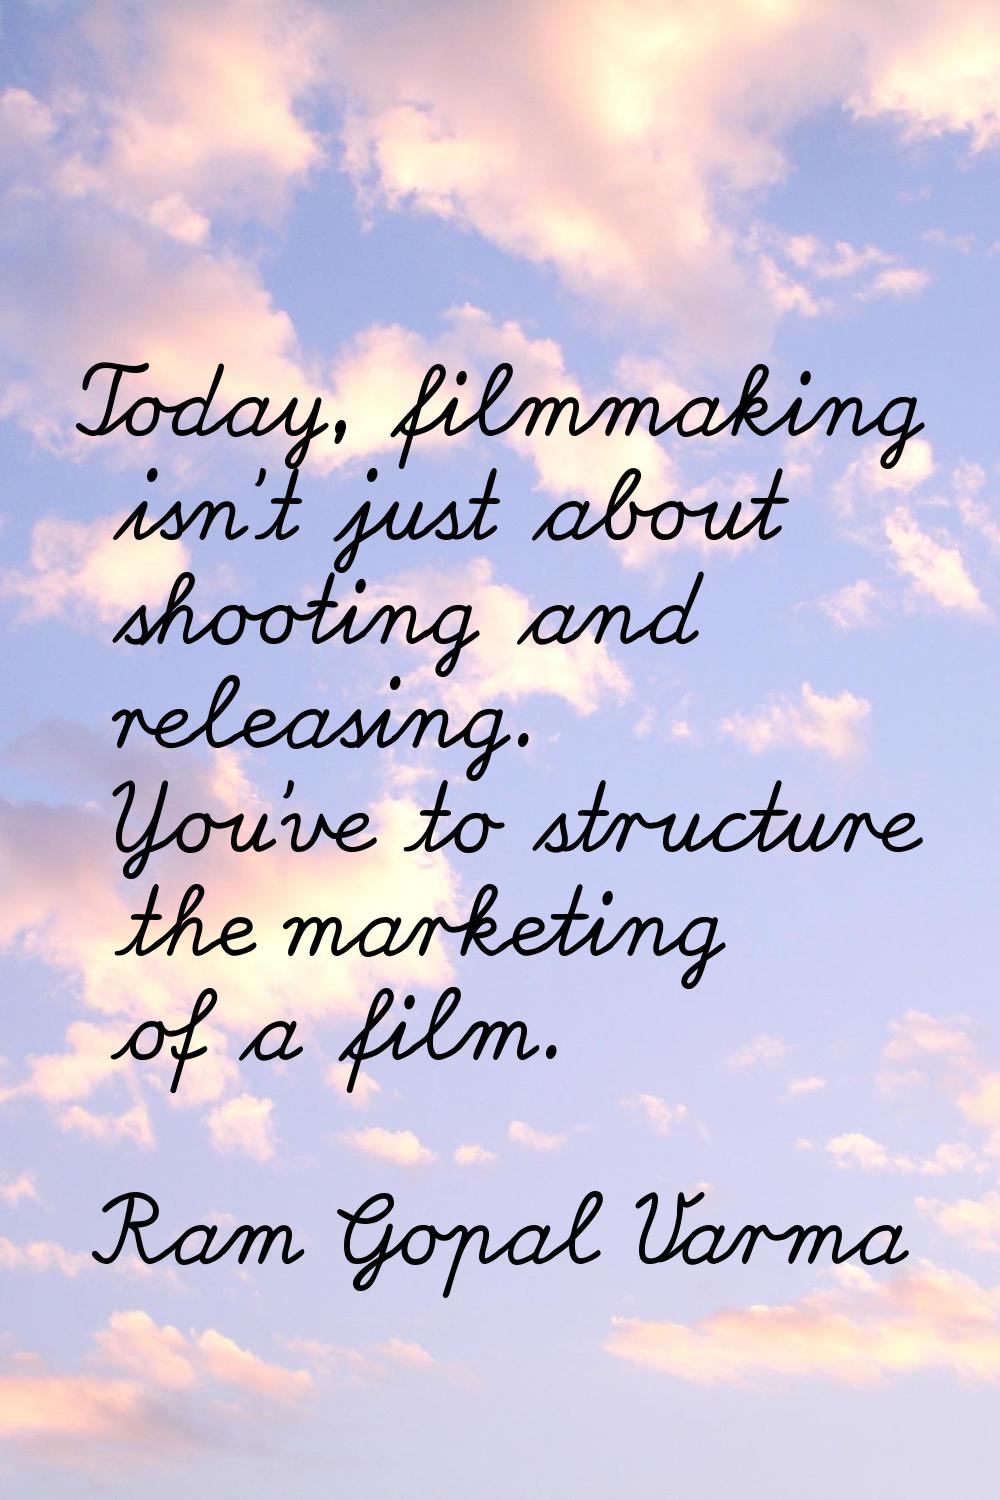 Today, filmmaking isn't just about shooting and releasing. You've to structure the marketing of a f